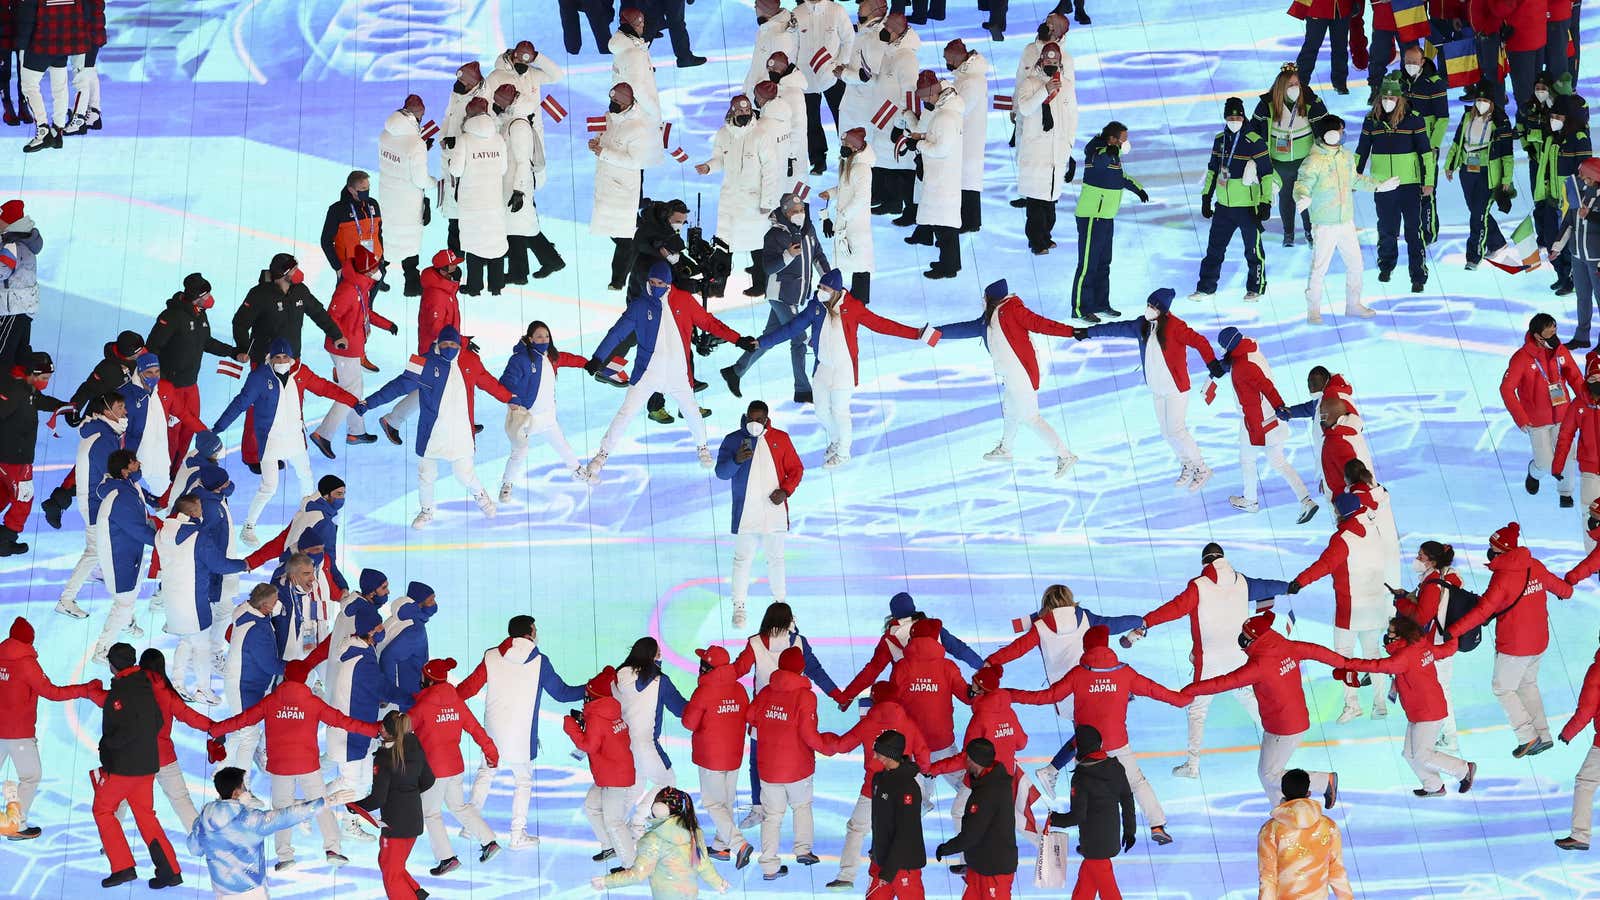 People walk around in a circles holding hands at the closing ceremony in Beijing.